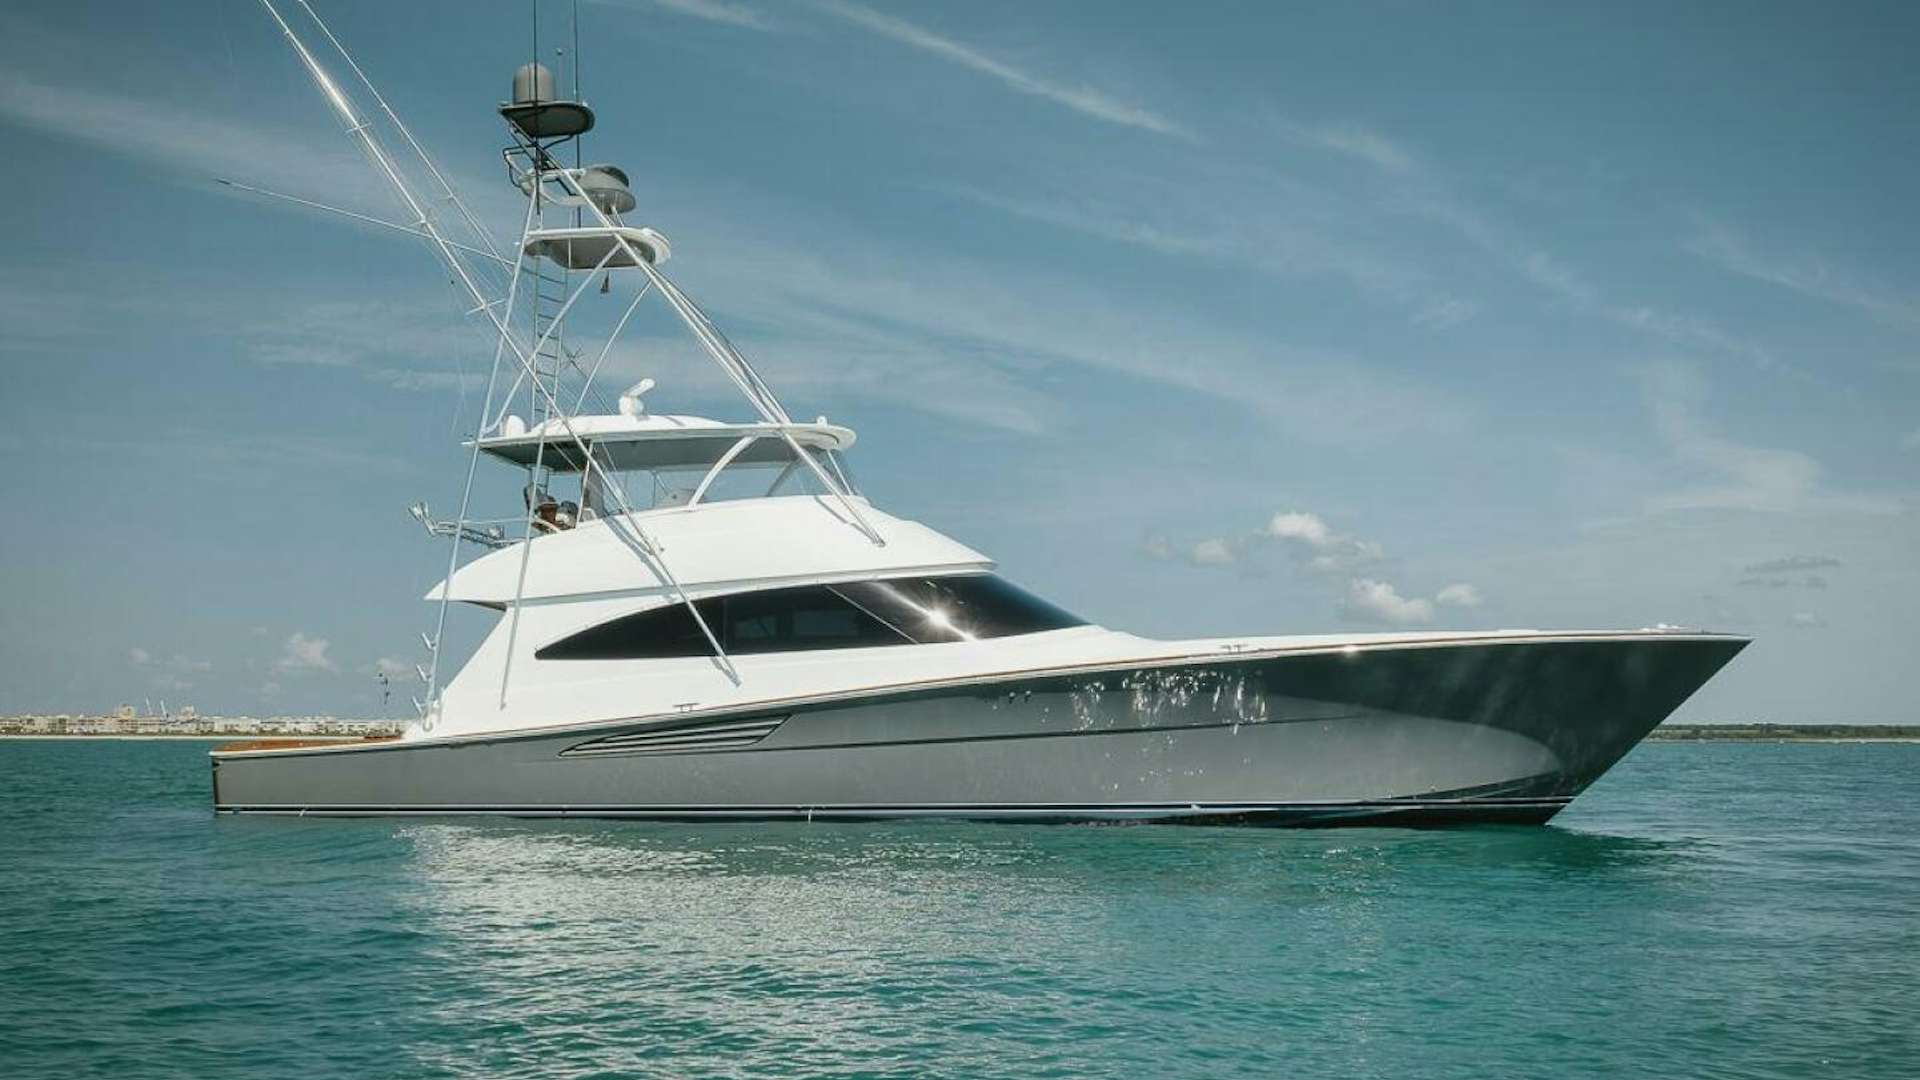 Whirlwind
Yacht for Sale